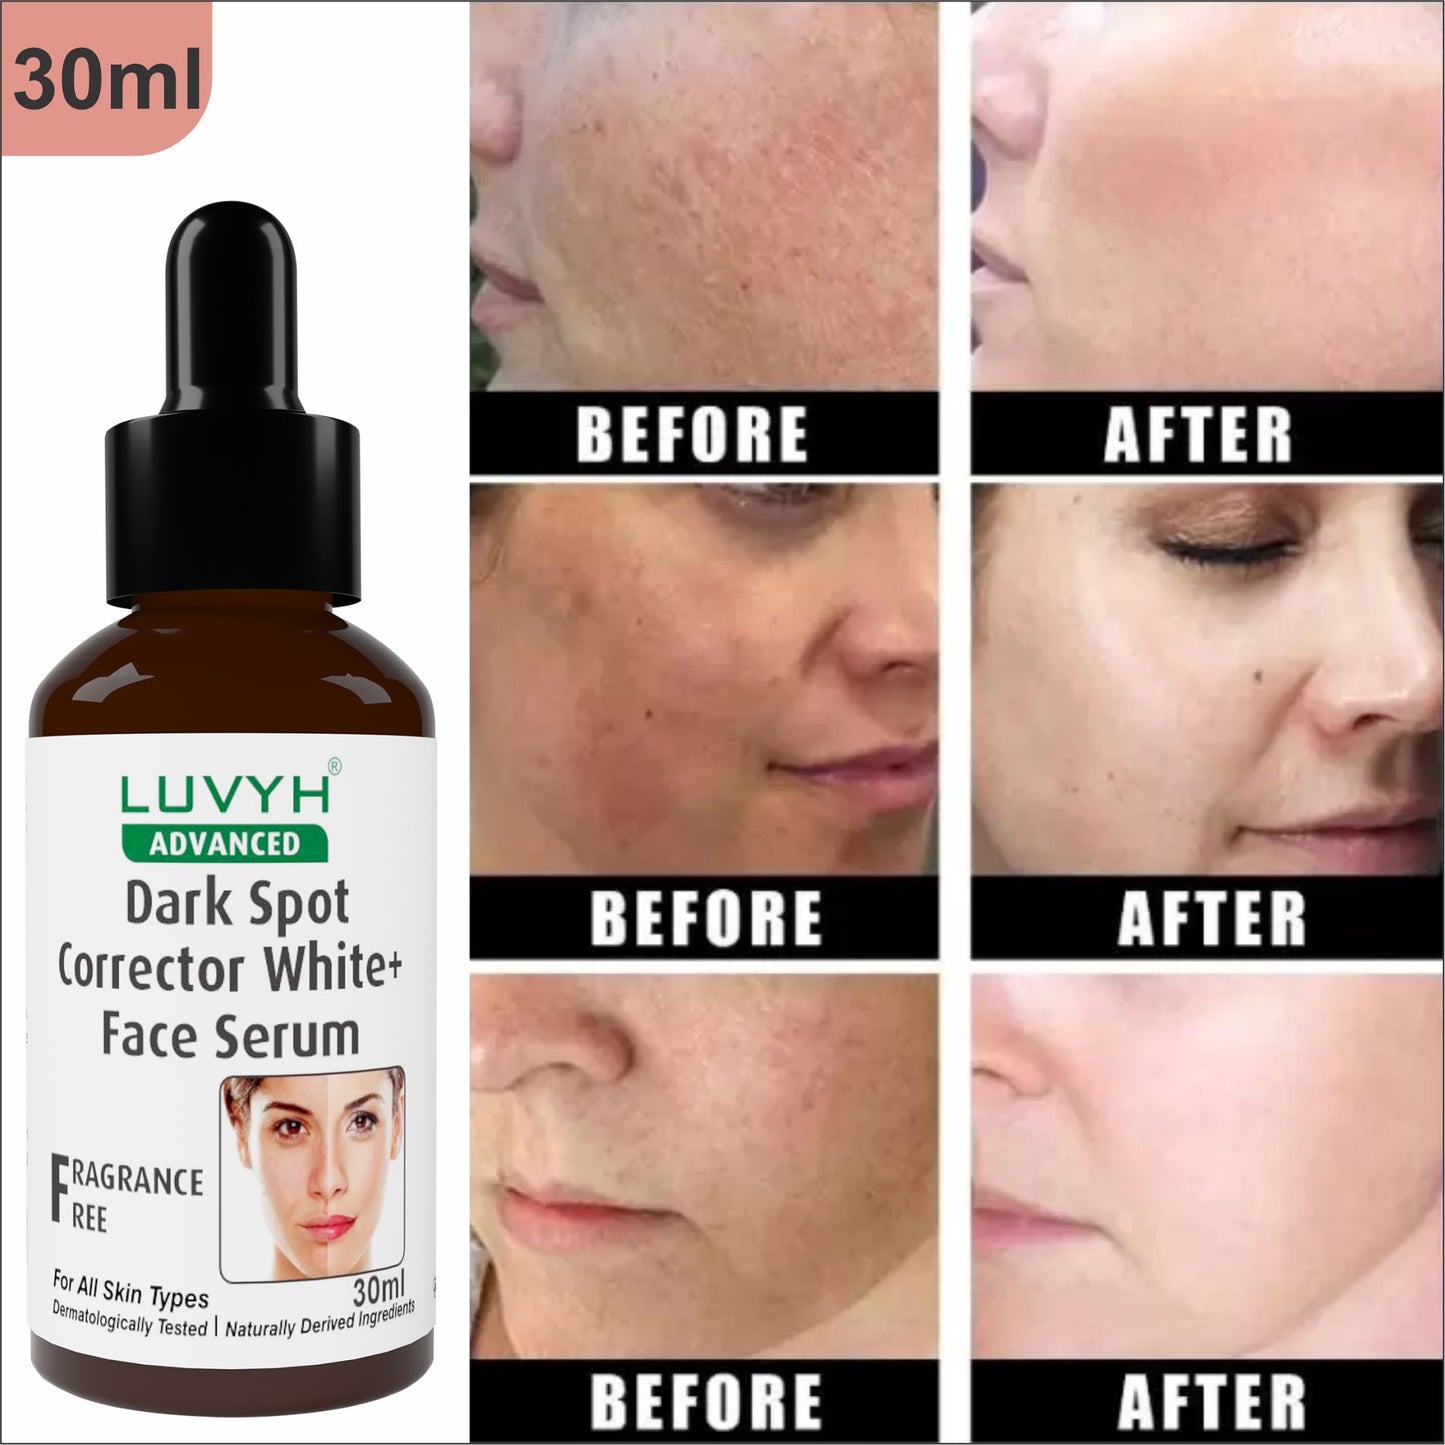 Before and After Results  Dark Spot Corrector White+ Face Serum 